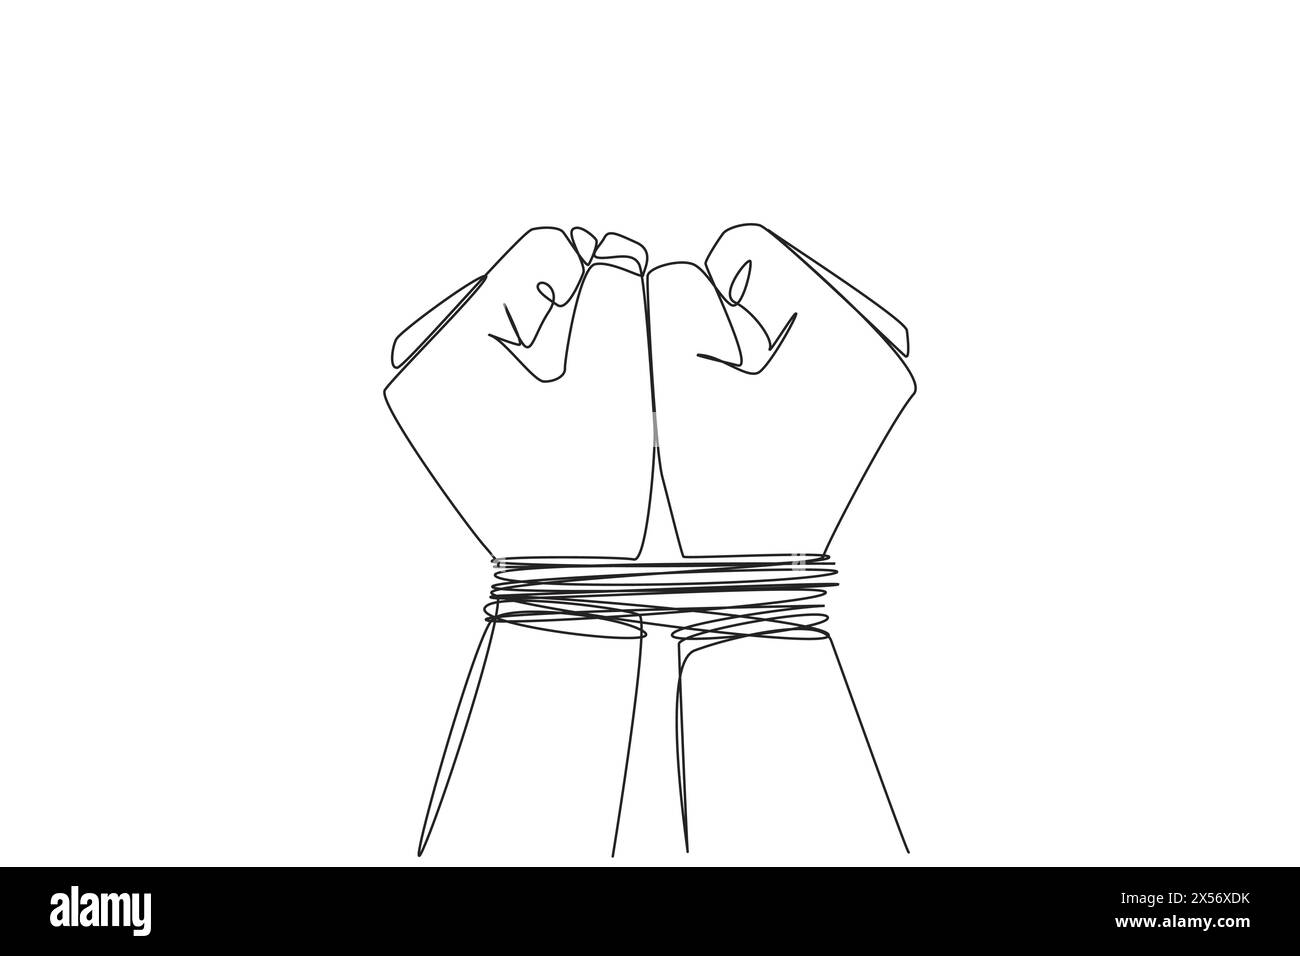 Single one line drawing of hand tied with rope. Entrepreneur involved in bribery case. Looking for profits without rules. Arrested. Detained. Impoveri Stock Vector